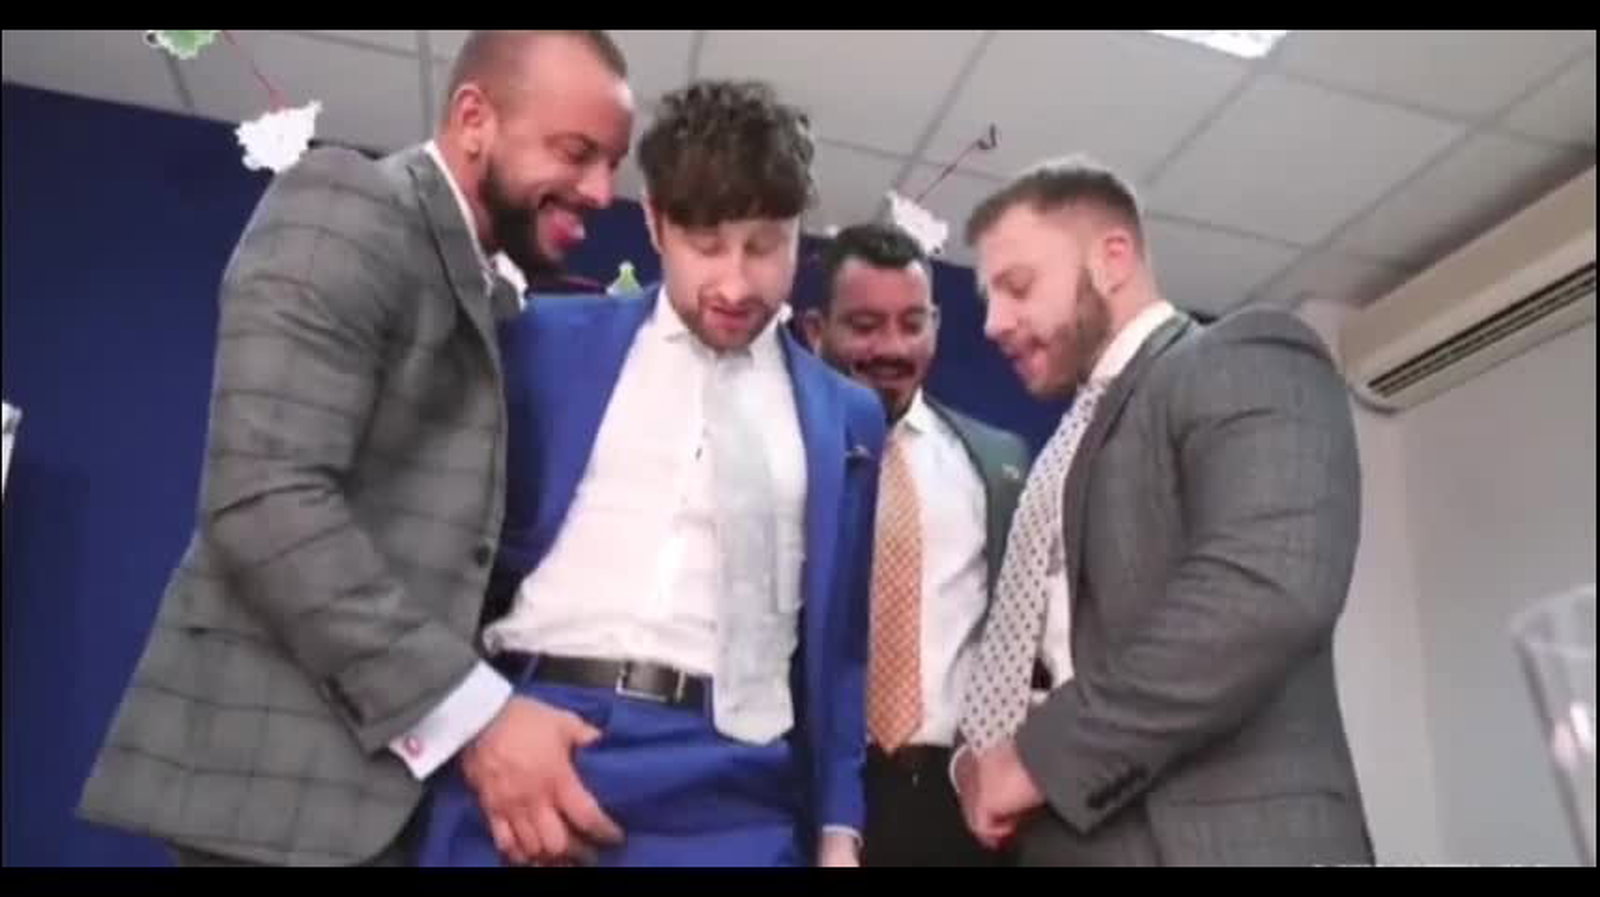 Shared Video by Maleplay with the username @Maleplay, who is a verified user,  June 22, 2023 at 2:42 AM and the text says 'Seed rain 💦💦💦 
The groom receiving the wet and stuffed gift from the groomsmen before the ceremony.  
It's to ensure fertility...
💋💦💦💦🍆'